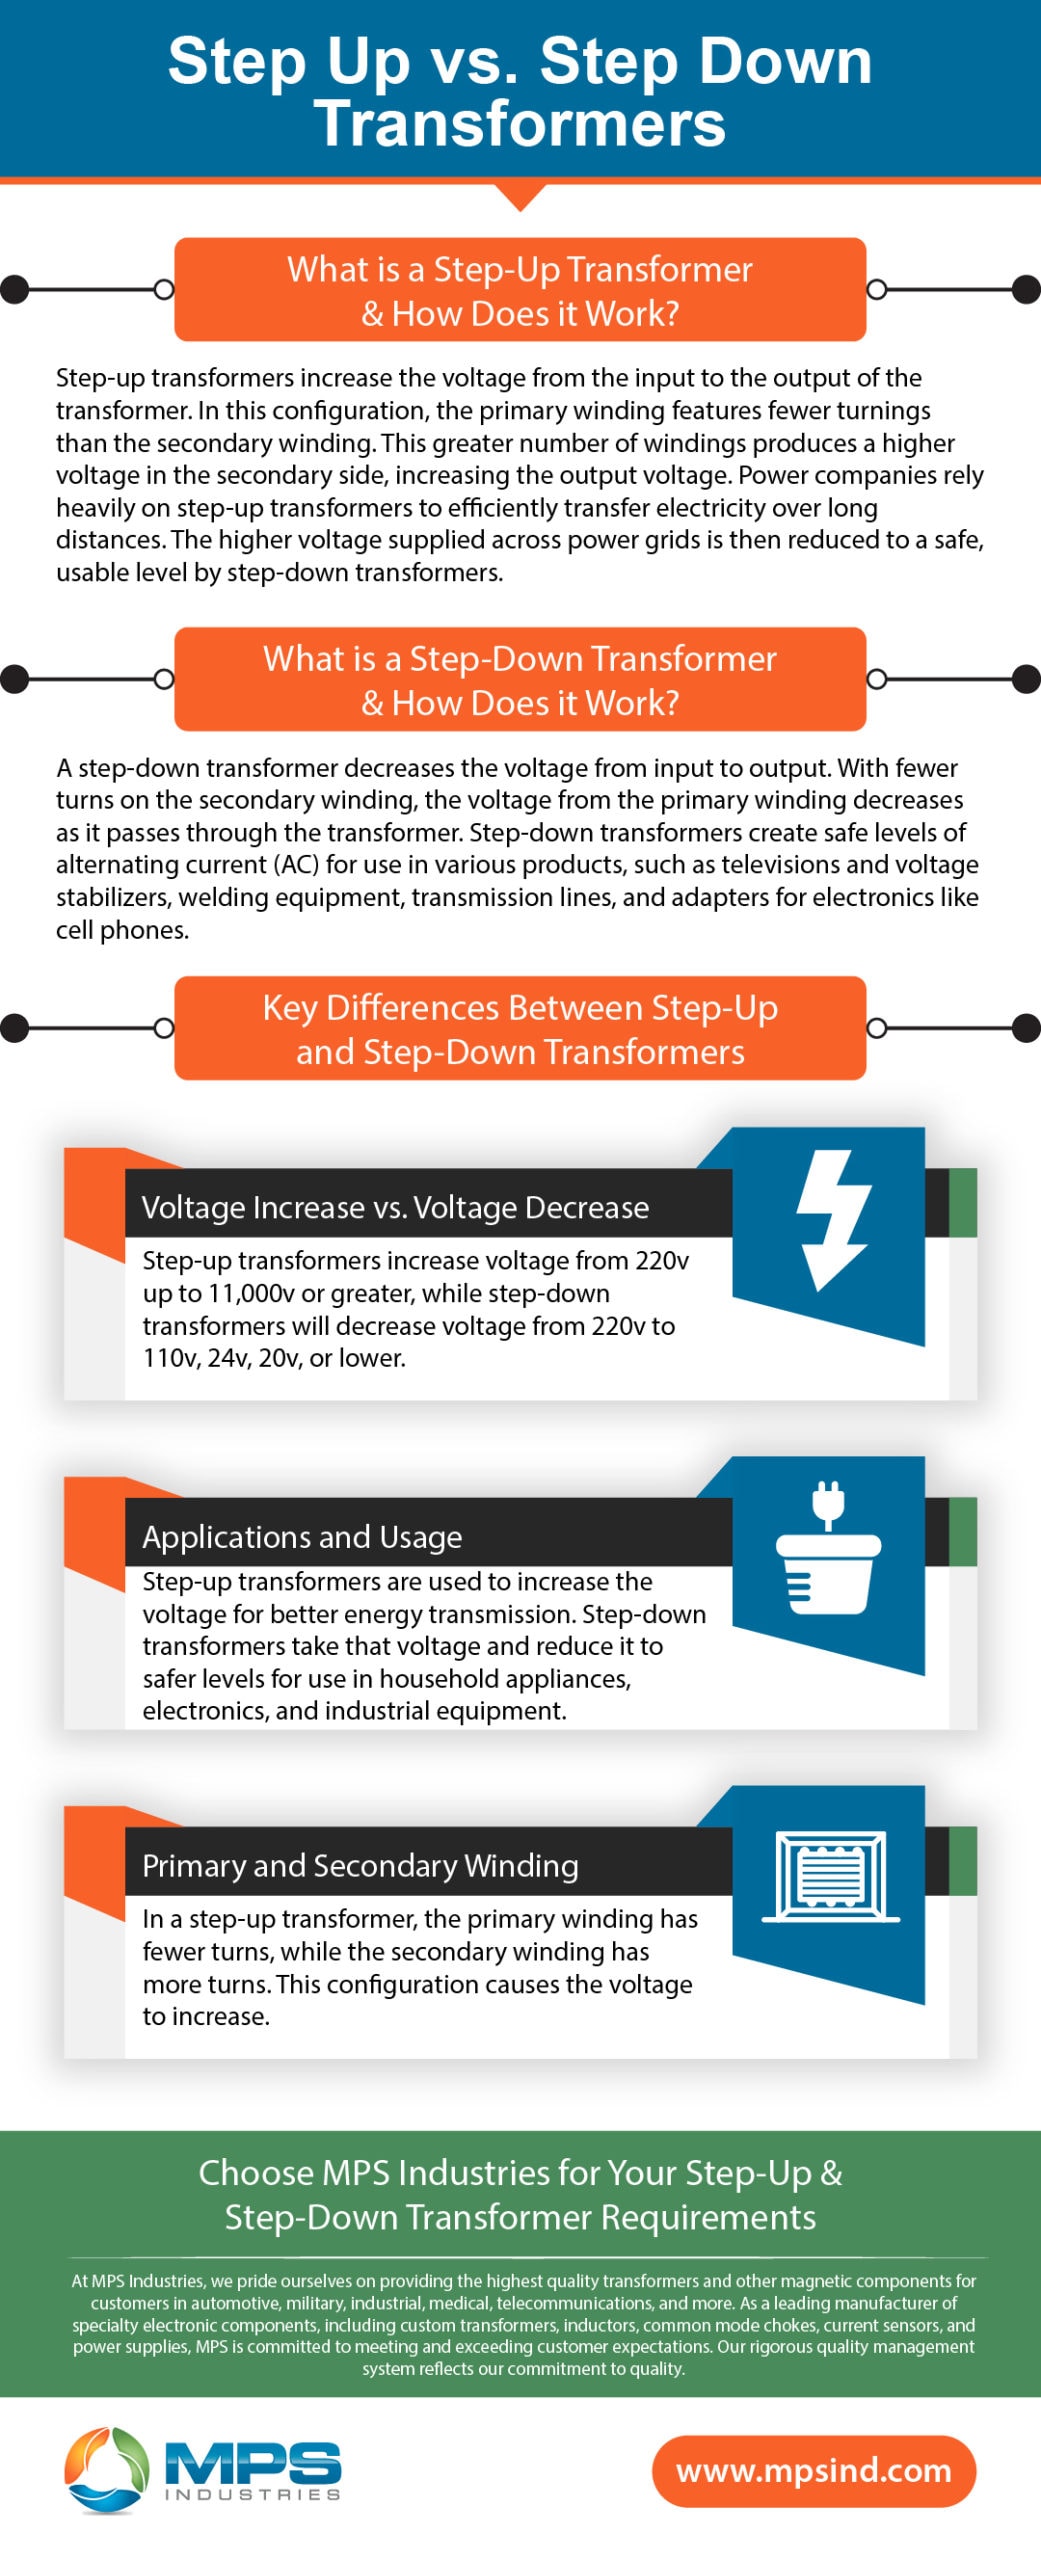 Step-Up vs. Step-Down Transformers & How They Work